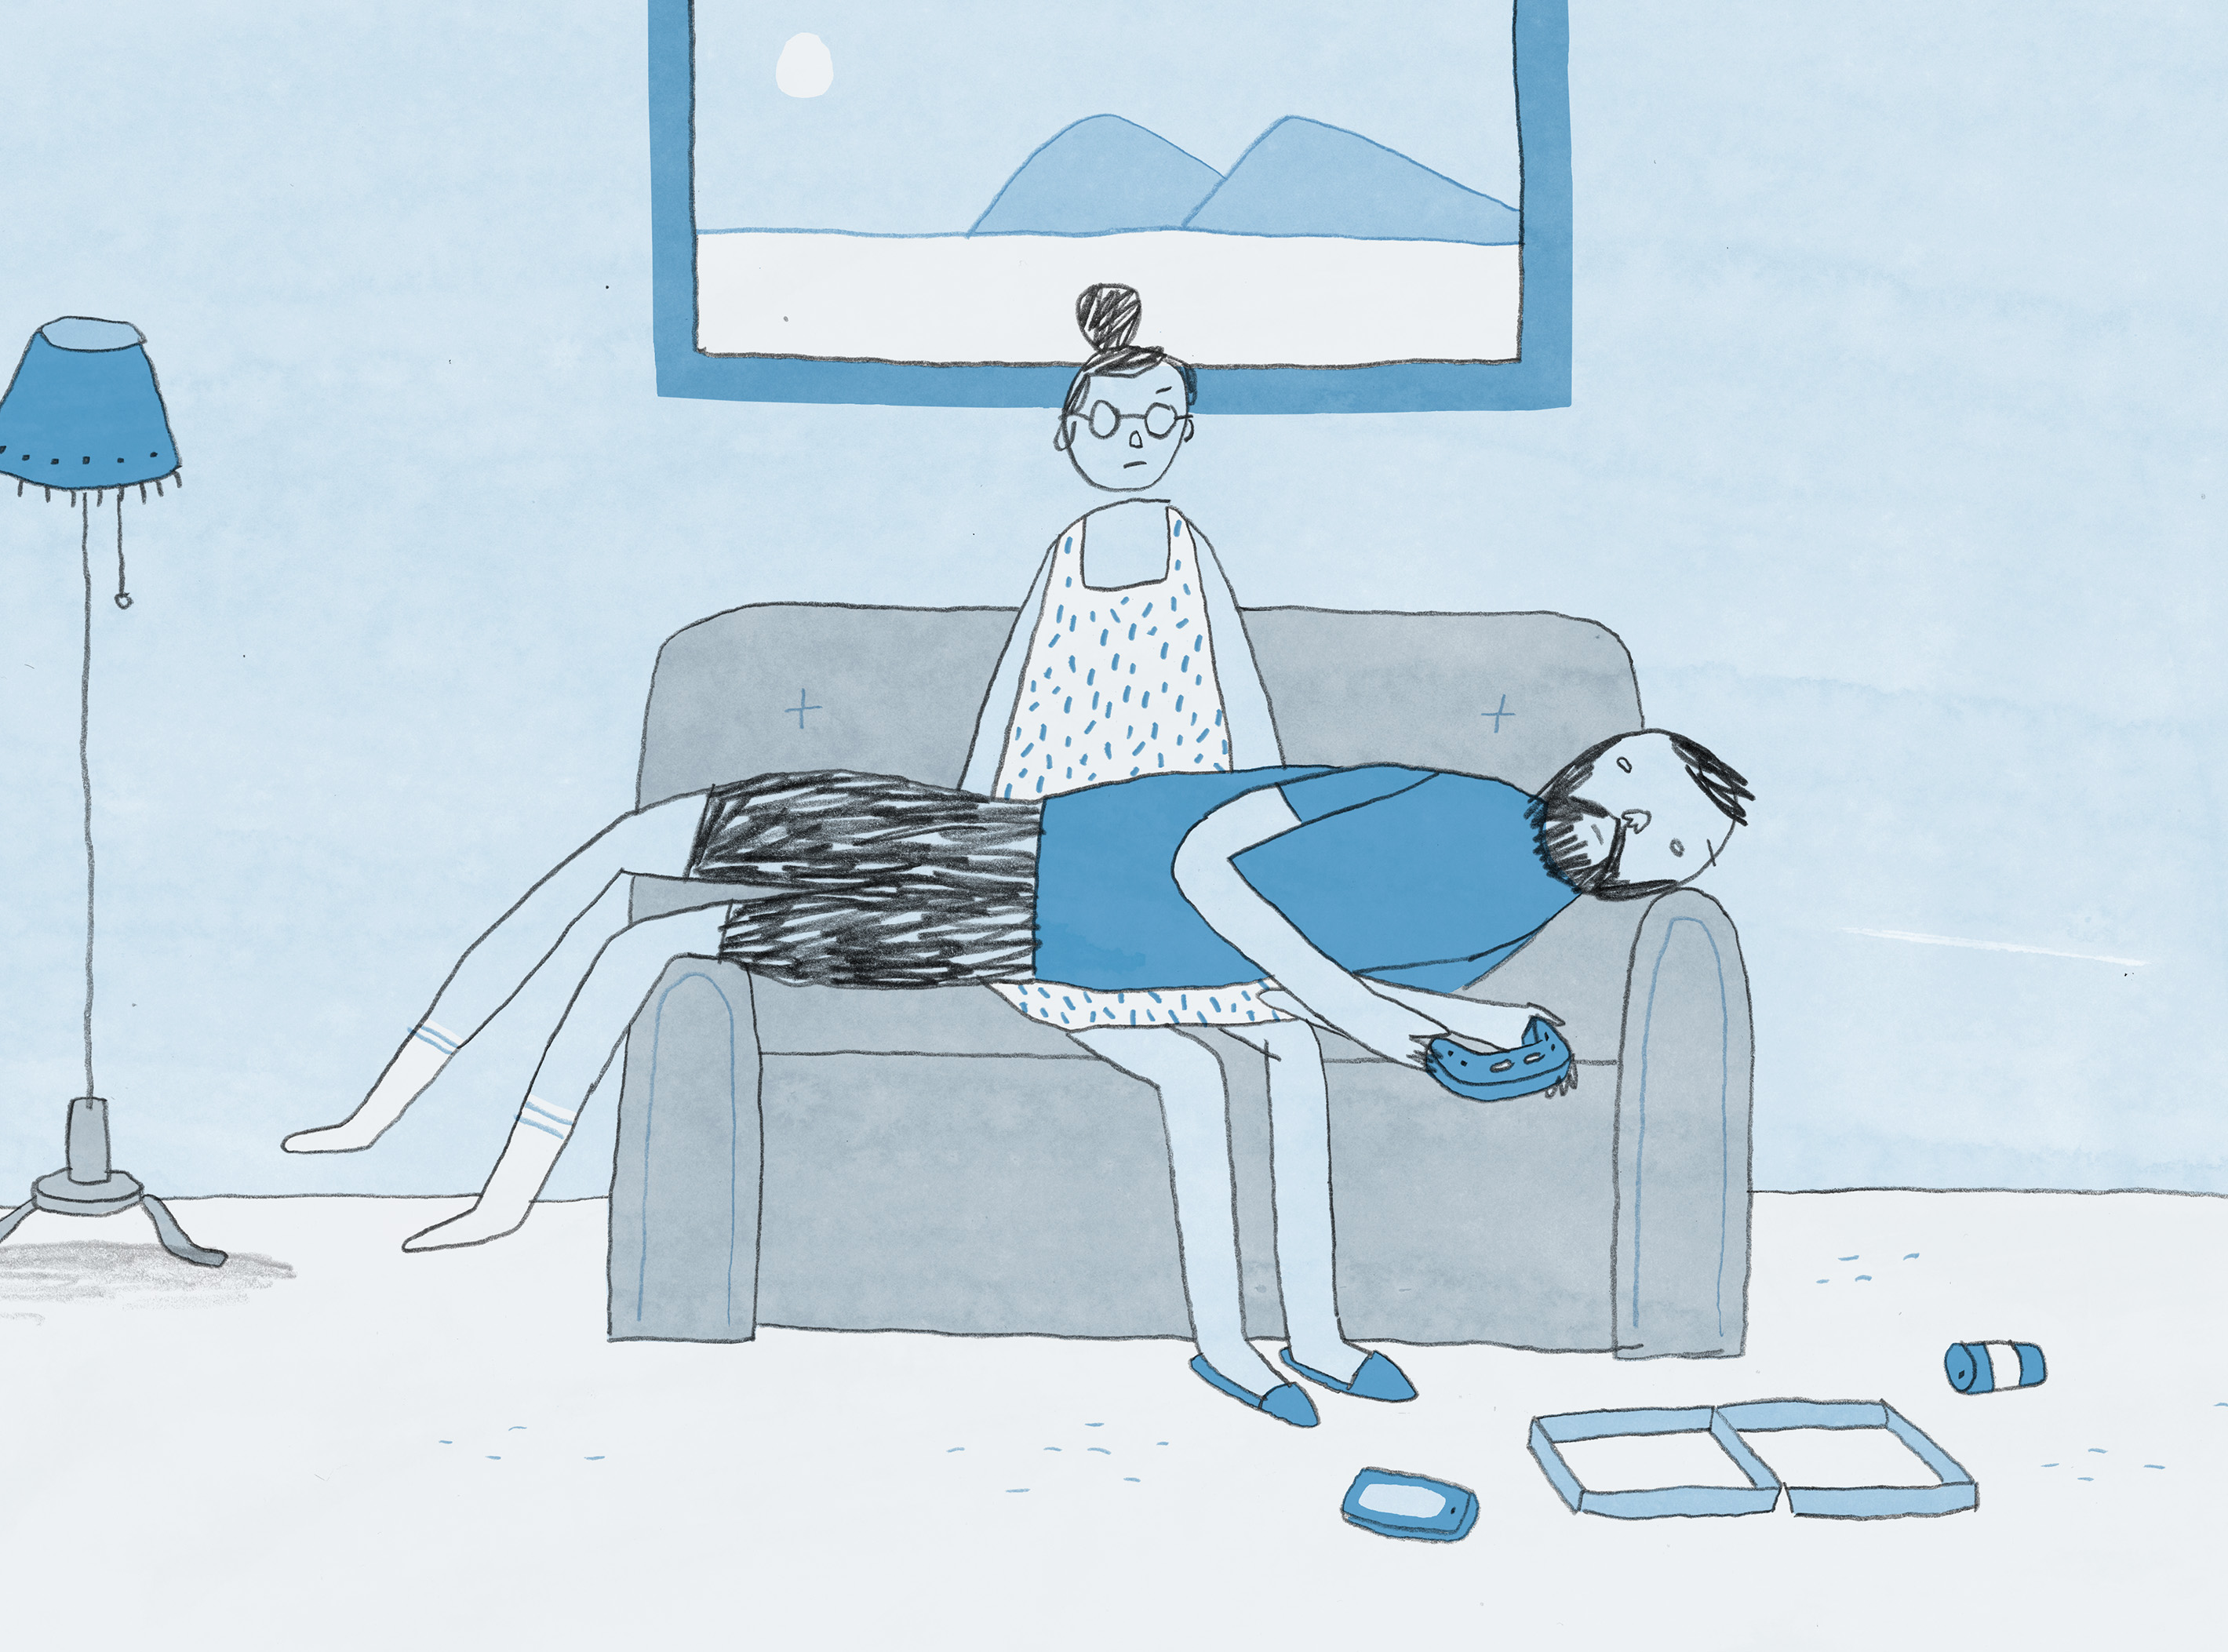 Illustration of a woman sitting on a couch with her adult son laying across her using a game controller